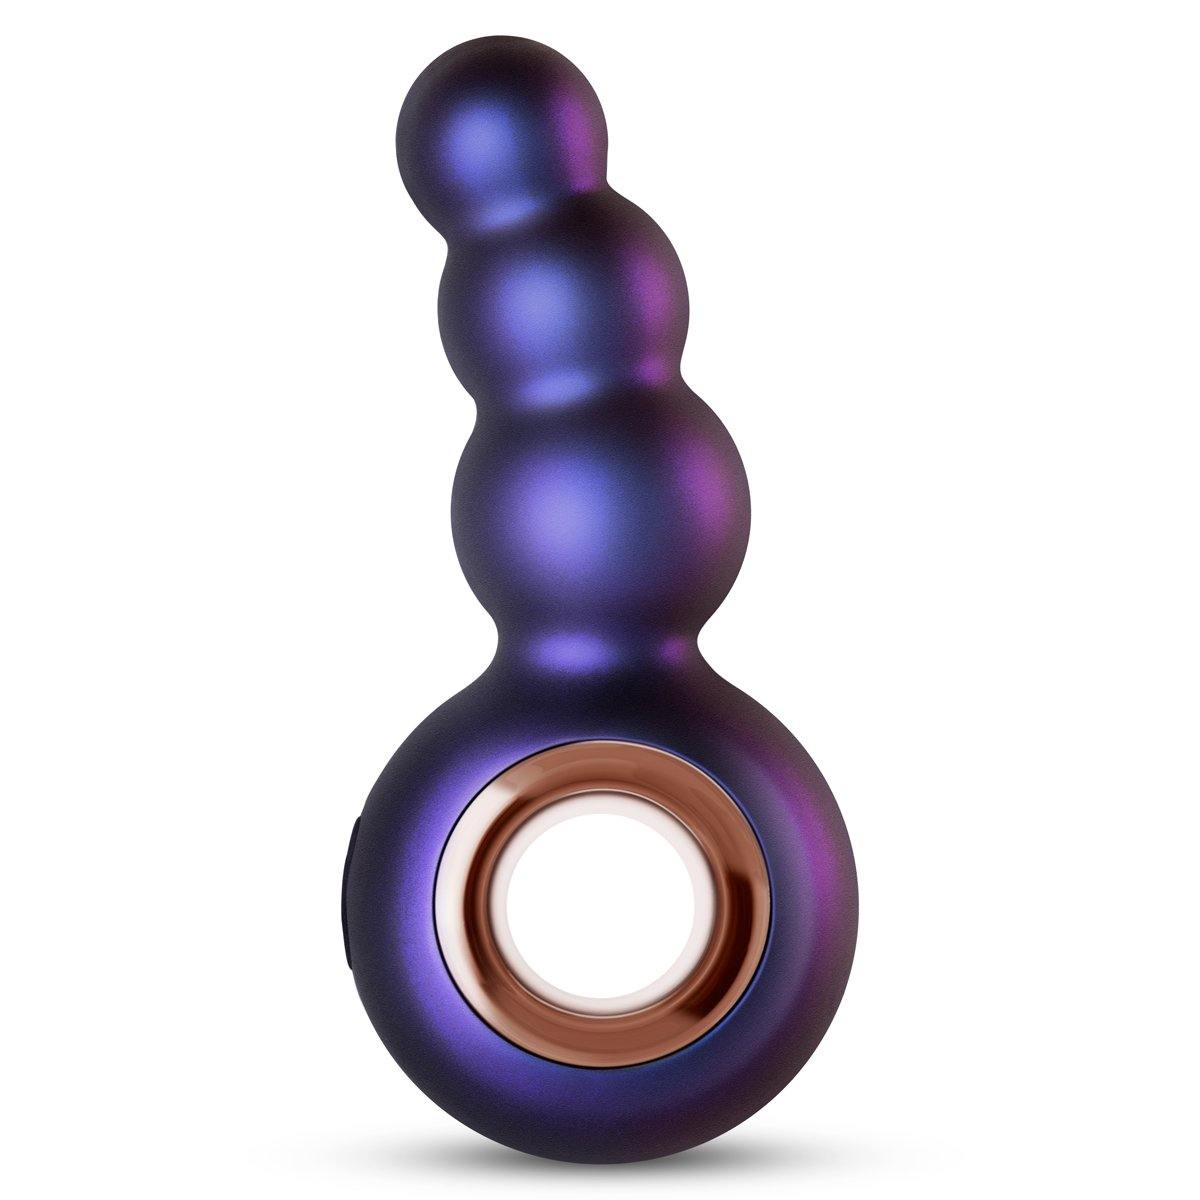 Hueman Outer Space Vibrating Anal Plug - Buy At Luxury Toy X - Free 3-Day Shipping